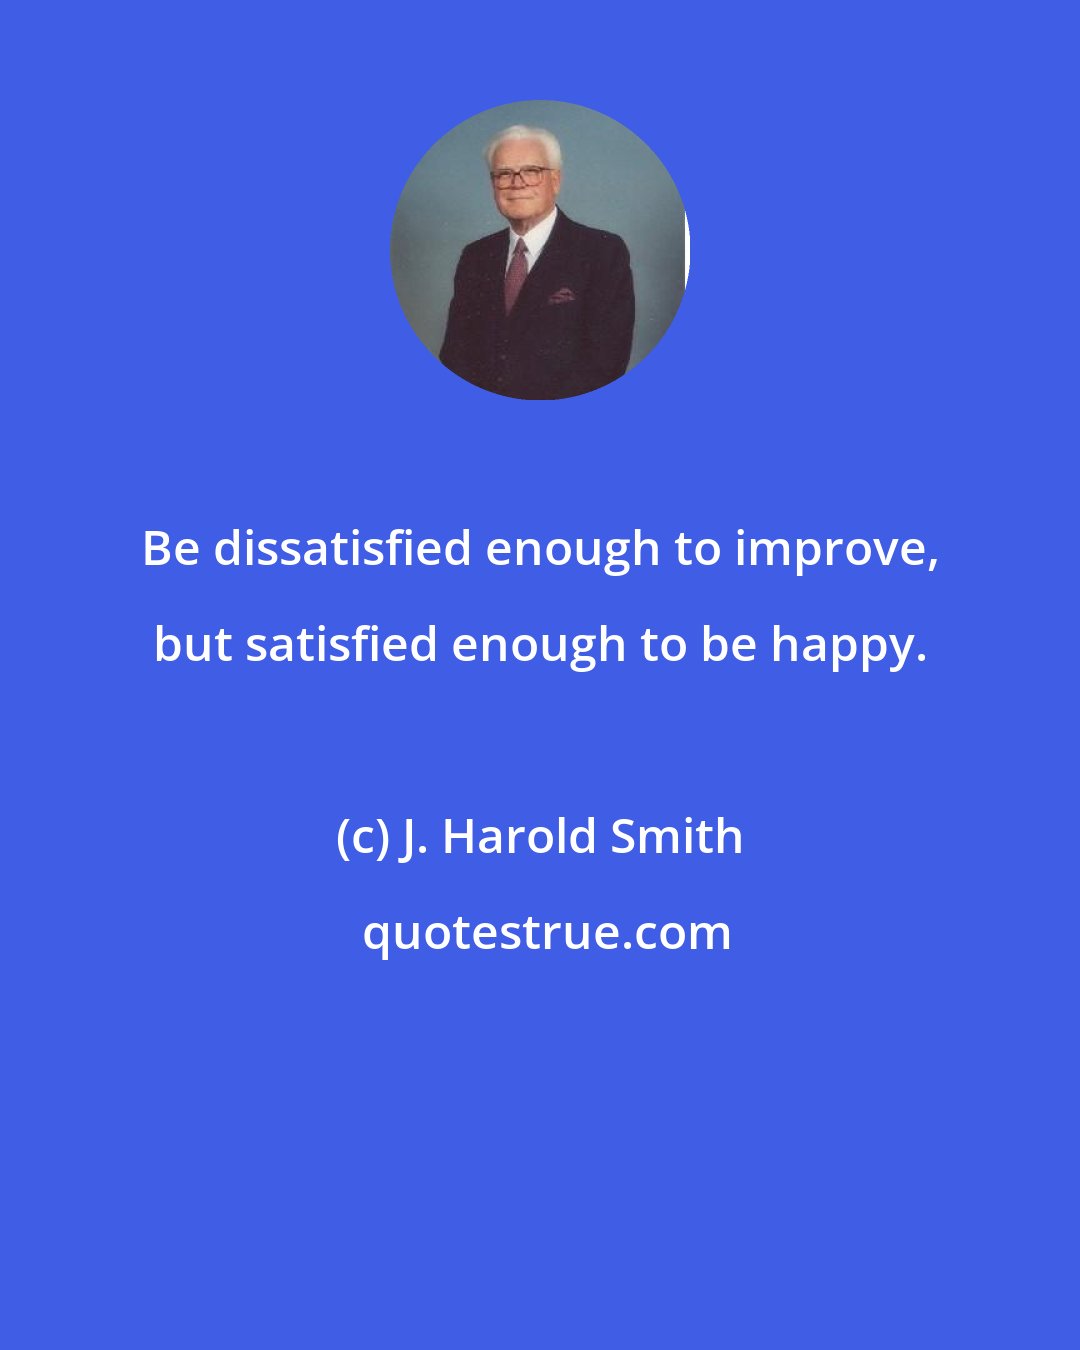 J. Harold Smith: Be dissatisfied enough to improve, but satisfied enough to be happy.